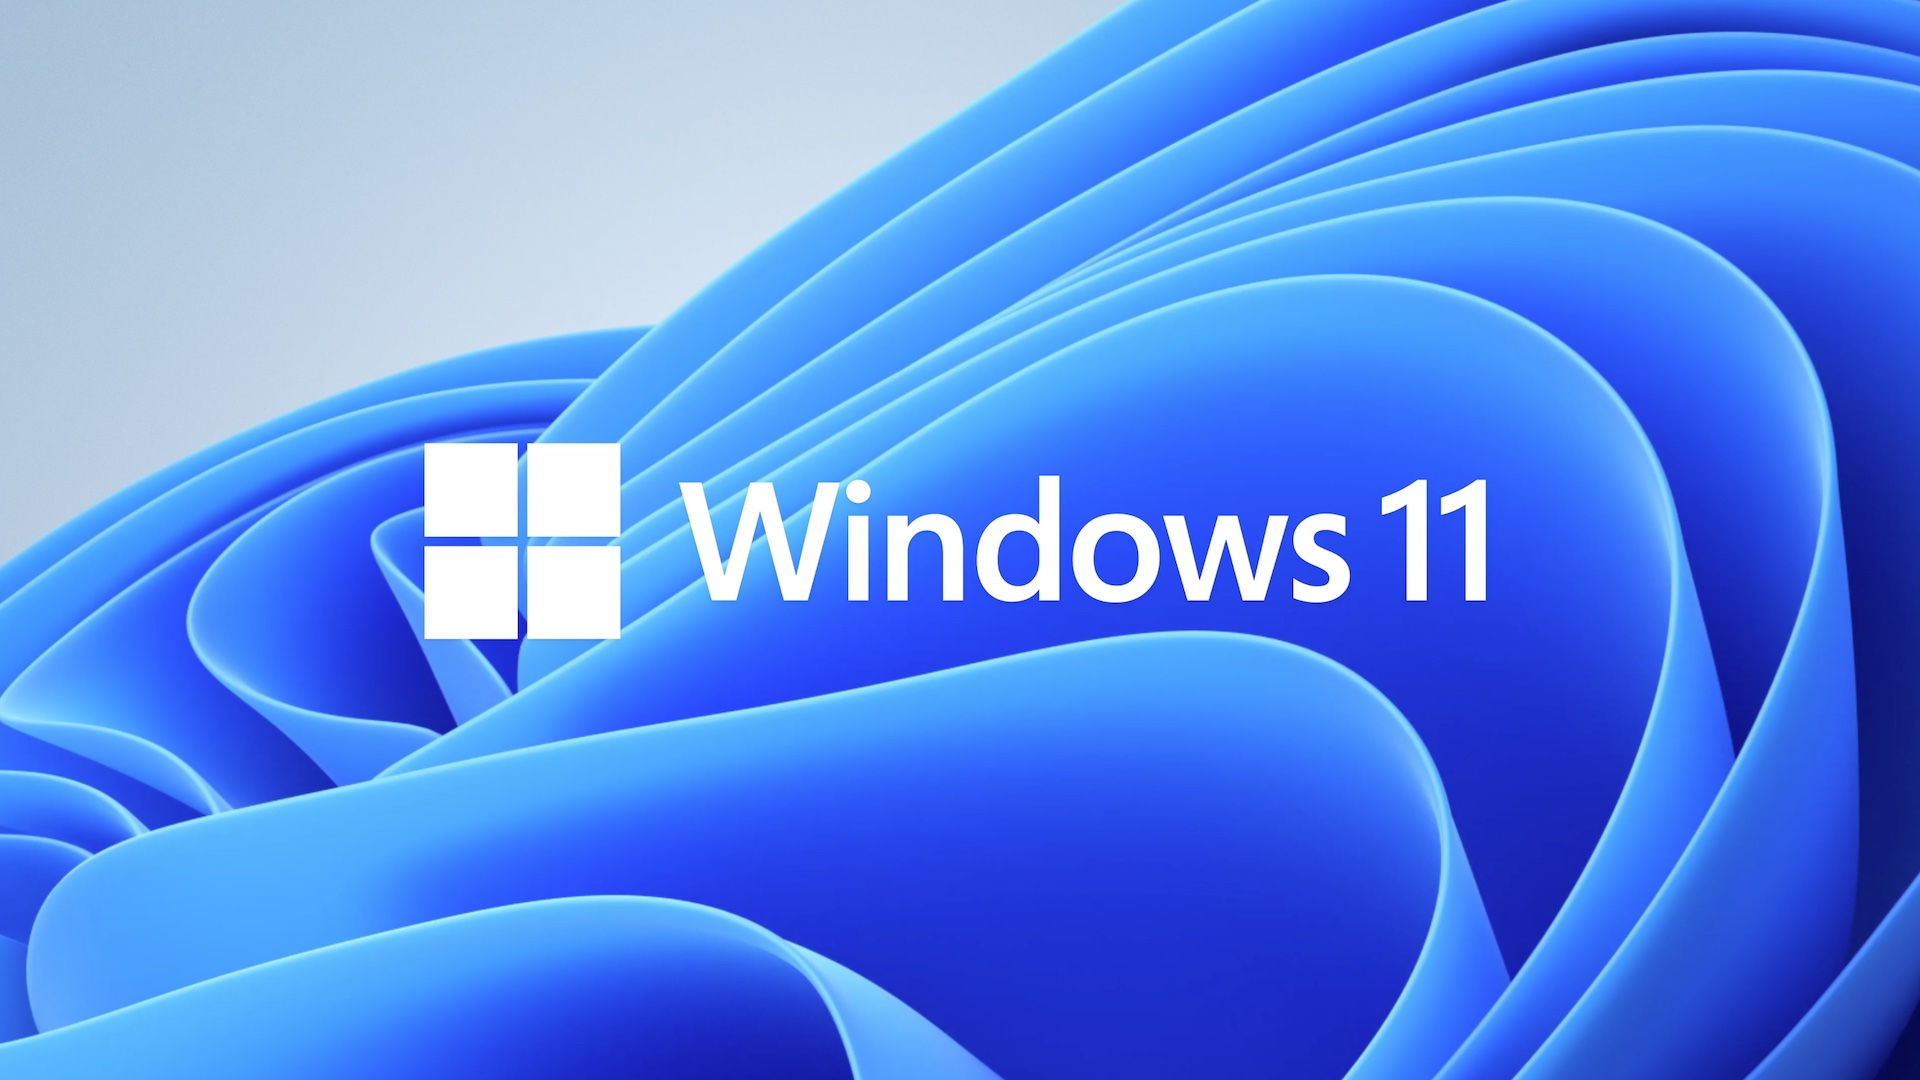 Why Windows 11 has such strict hardware requirements, according to Microsoft  | Ars Technica